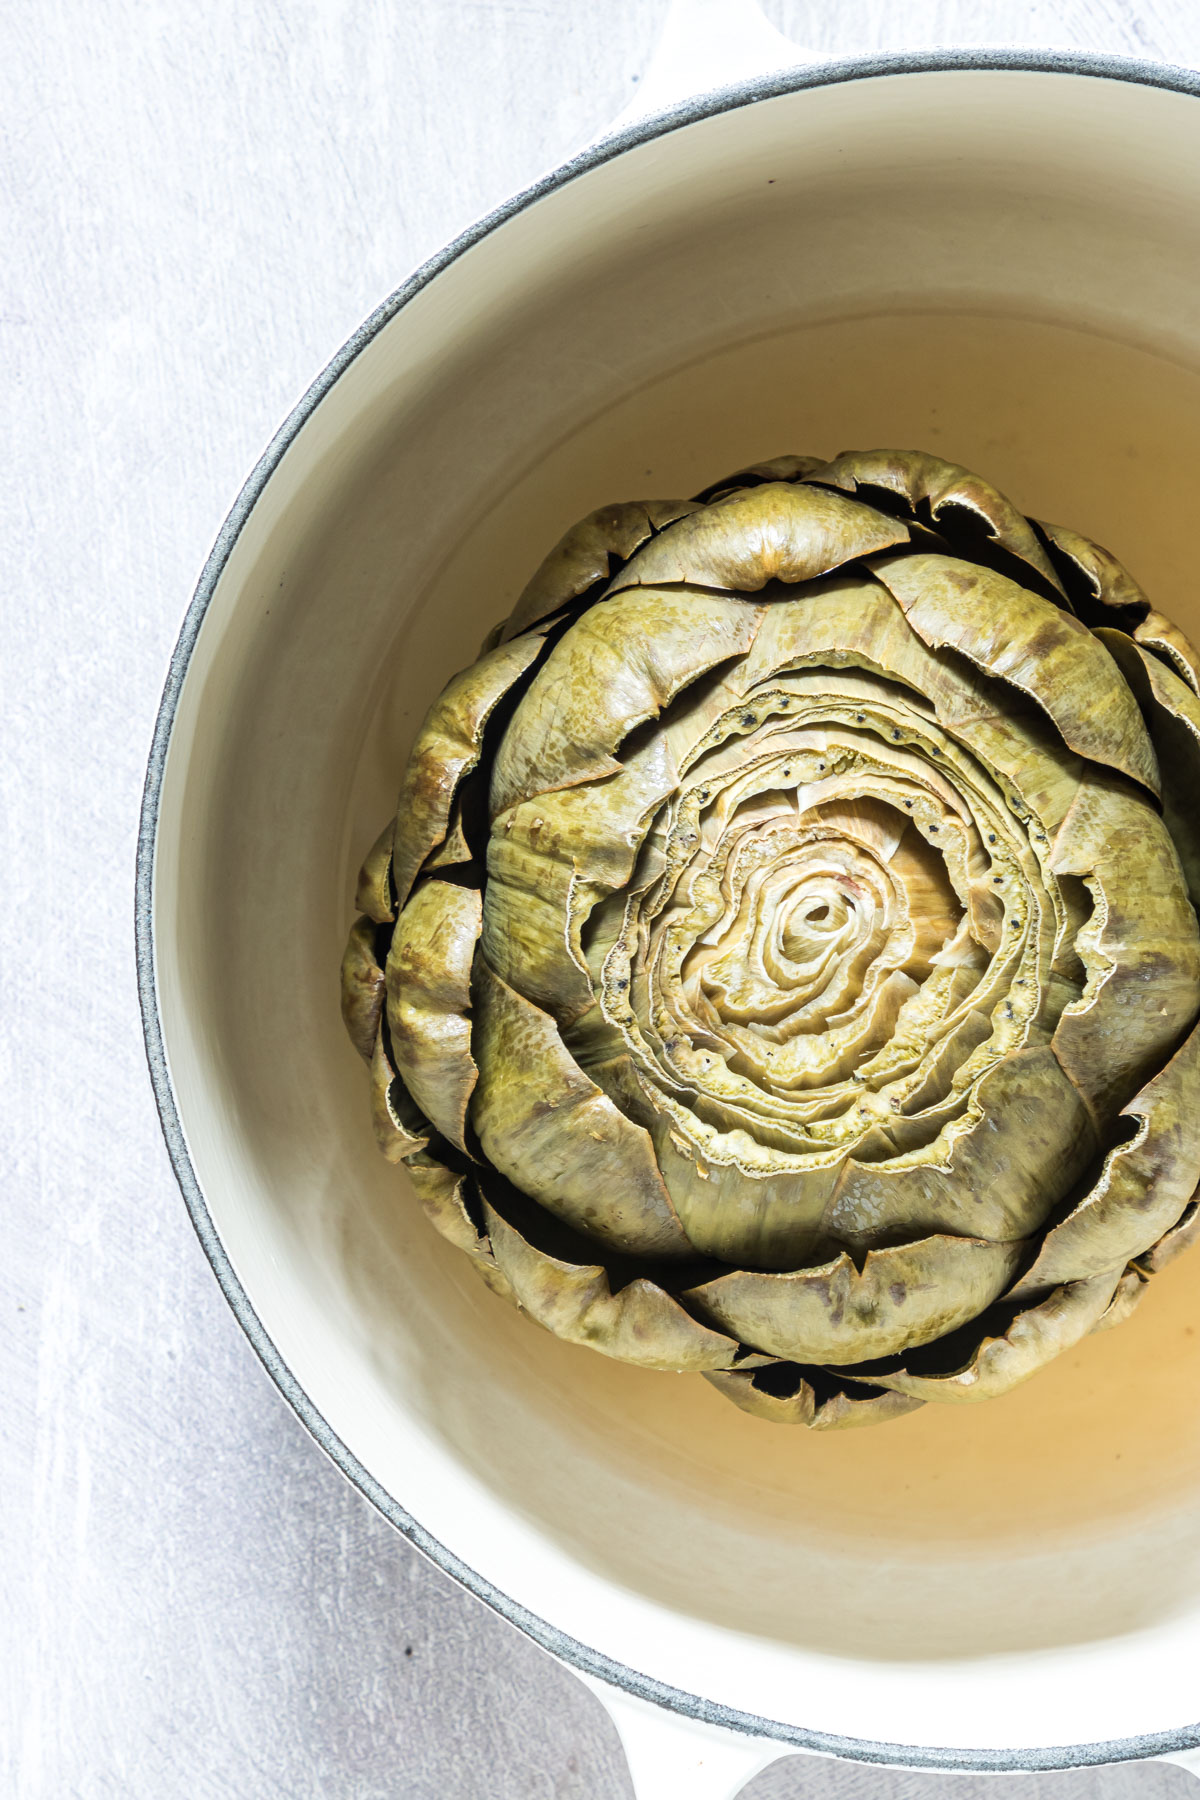 close up view of a cooked artichoke ready to be served